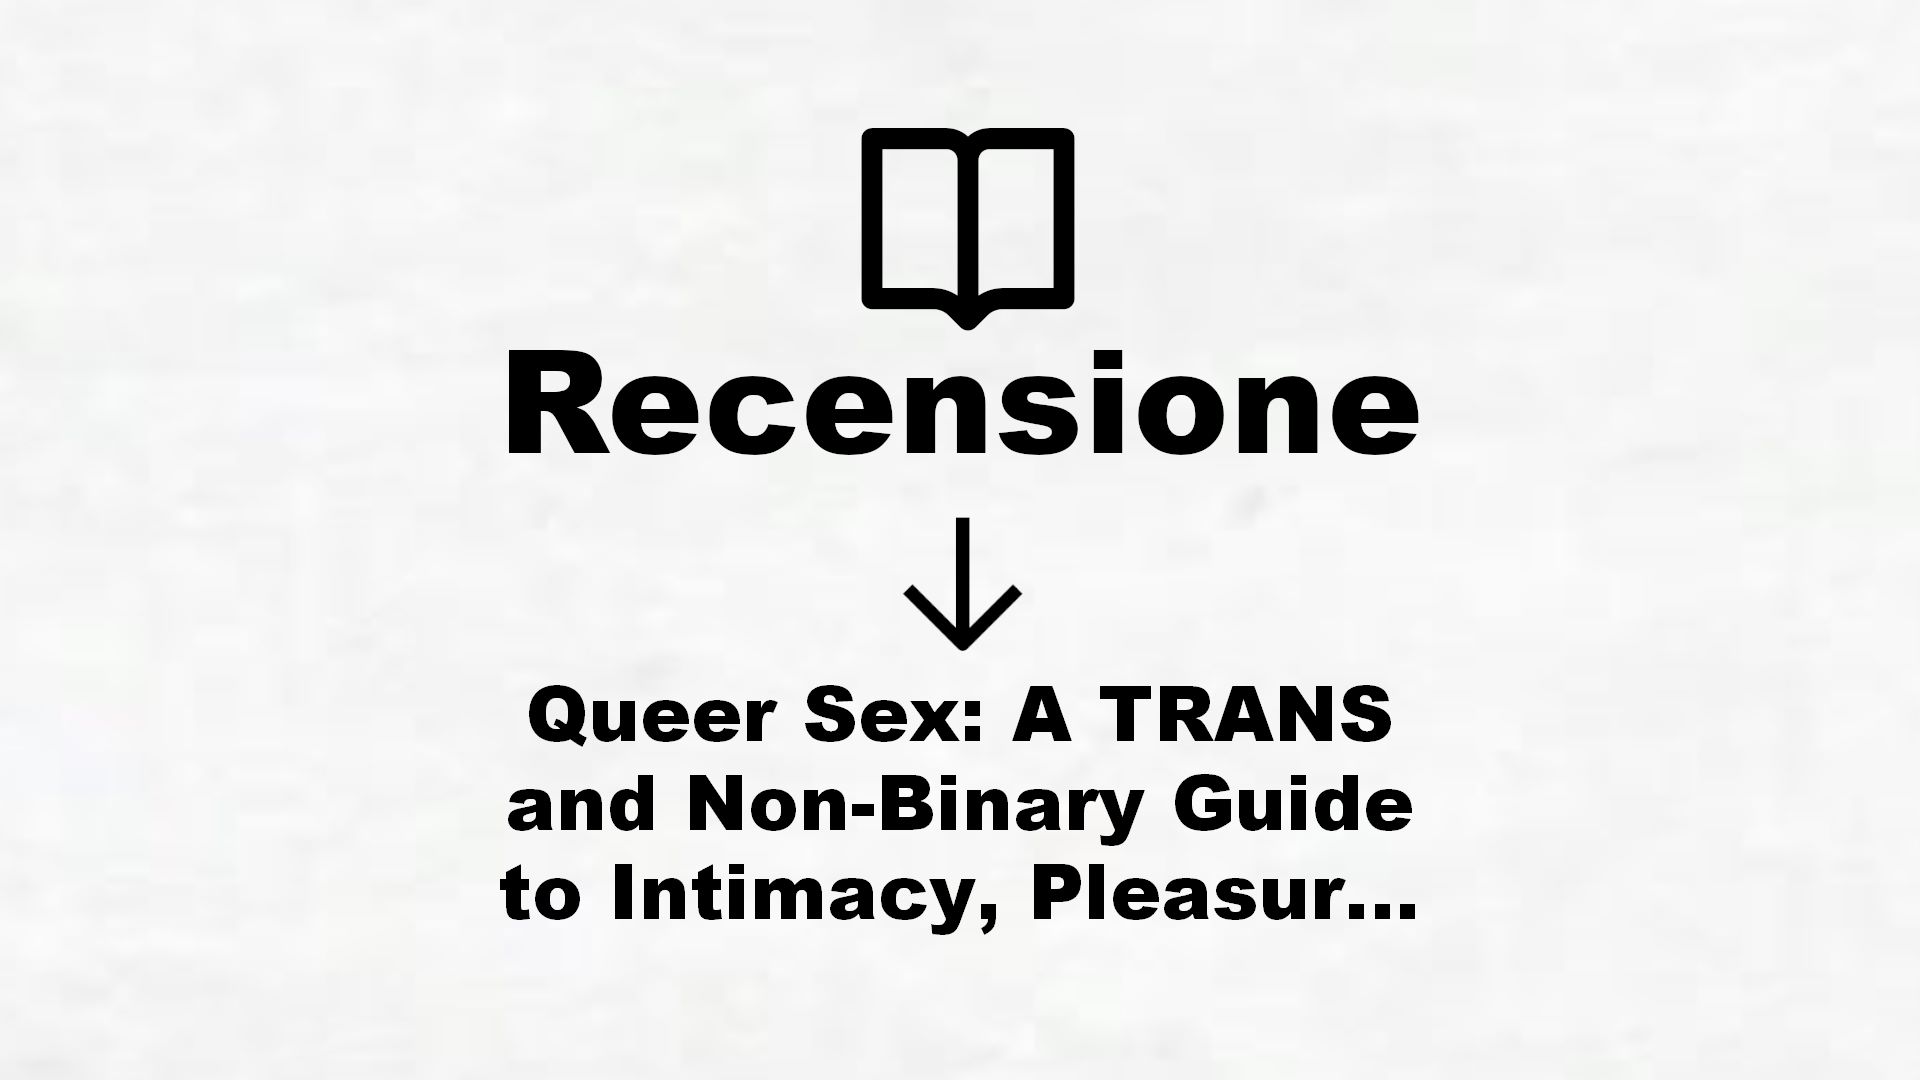 Queer Sex: A TRANS and Non-Binary Guide to Intimacy, Pleasure and Relationships – Recensione Libro